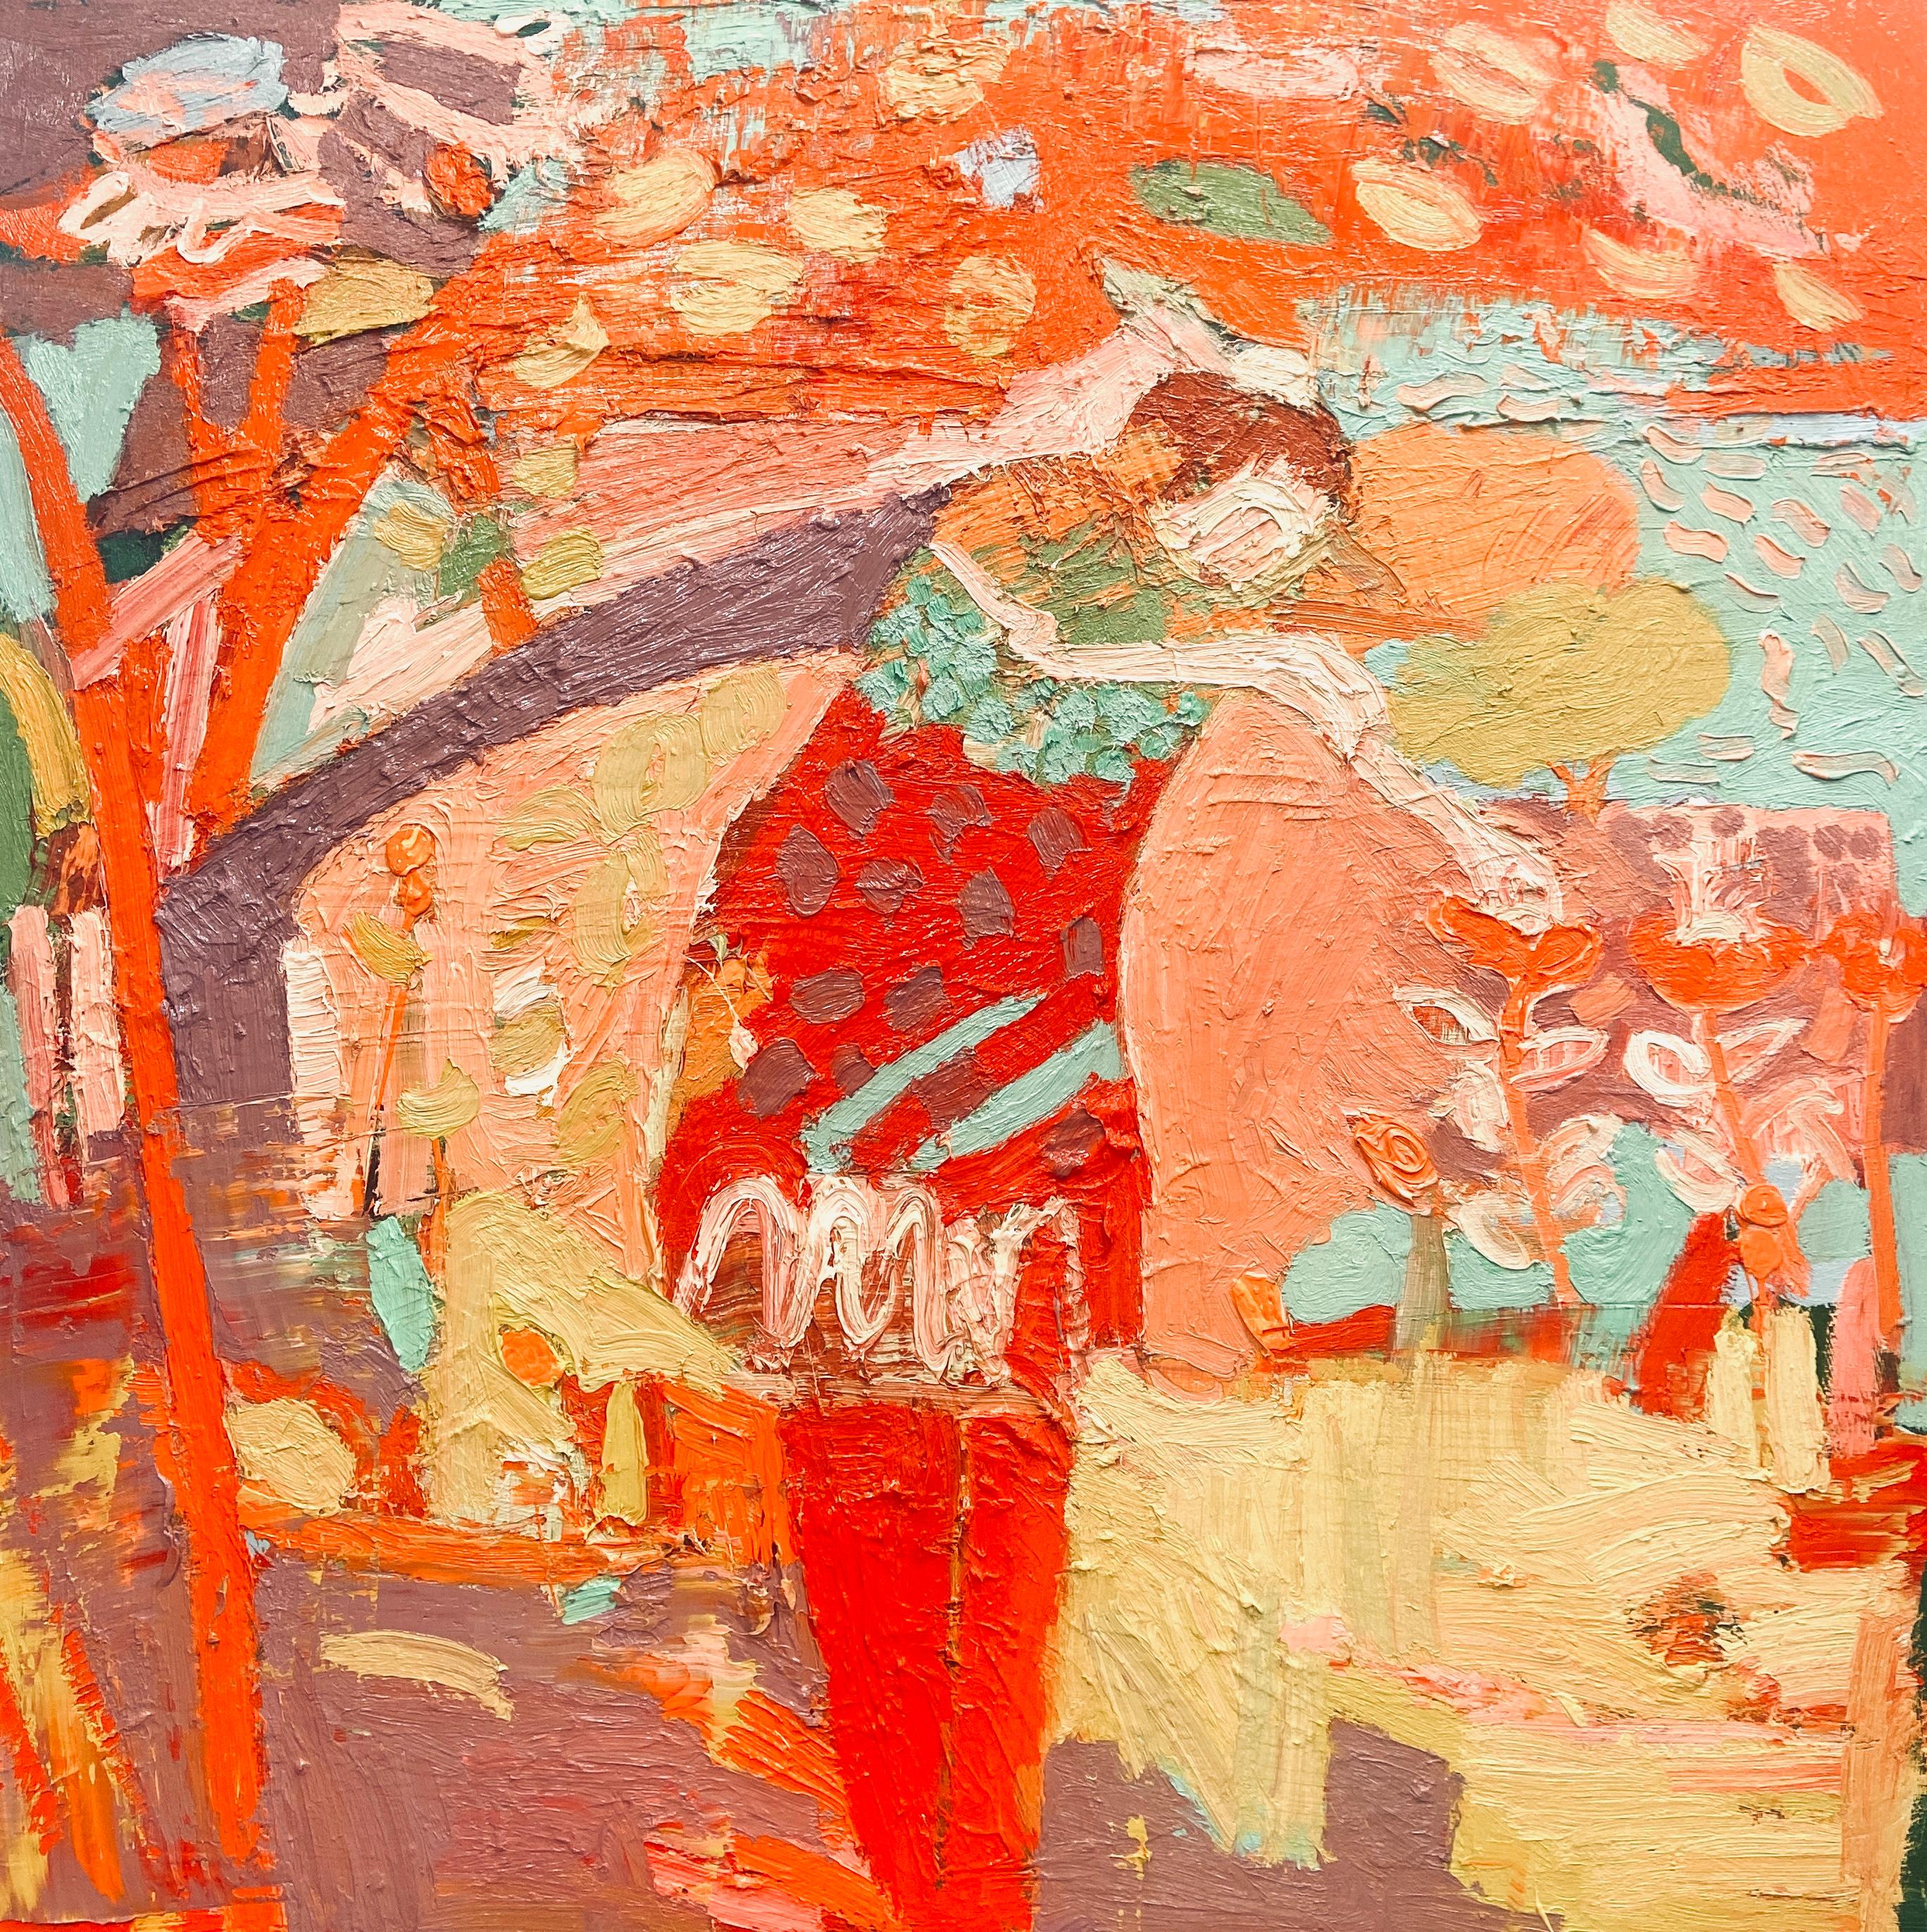 Paul wadsworth Landscape Painting - Saffron:   Large Contemporary Expressionist Oil Painting